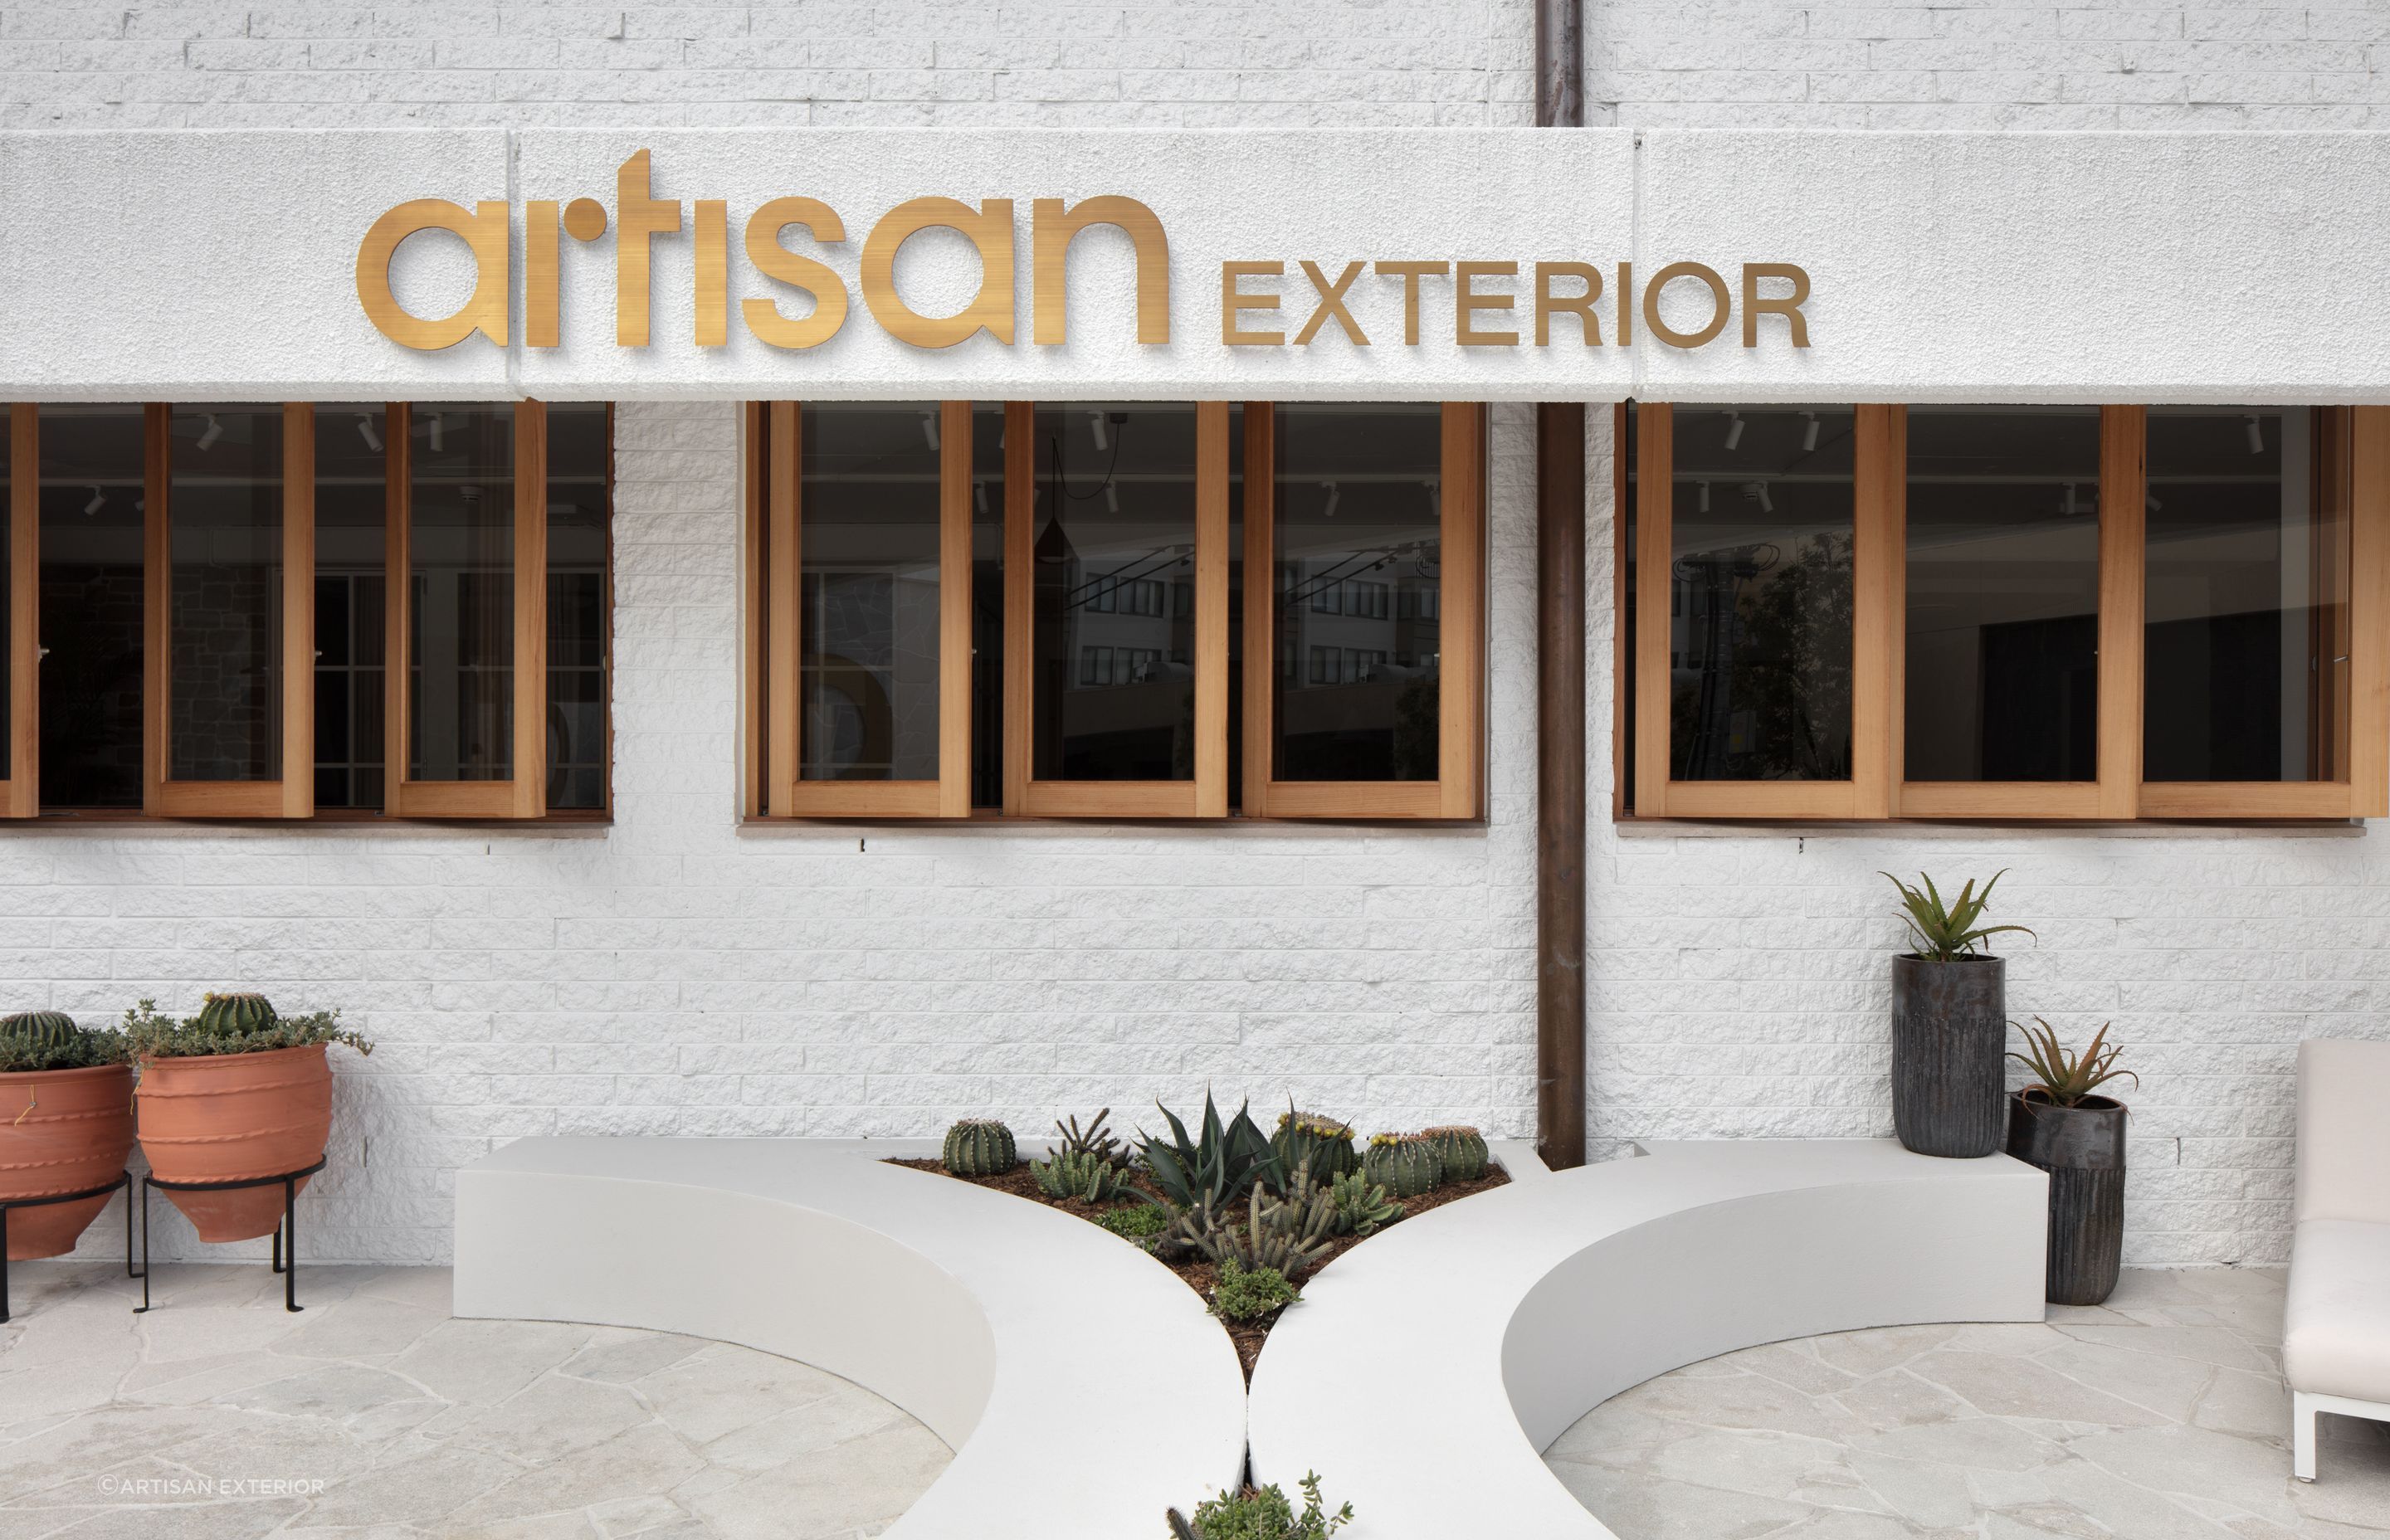 The entrance of Artisan Exterior's showroom